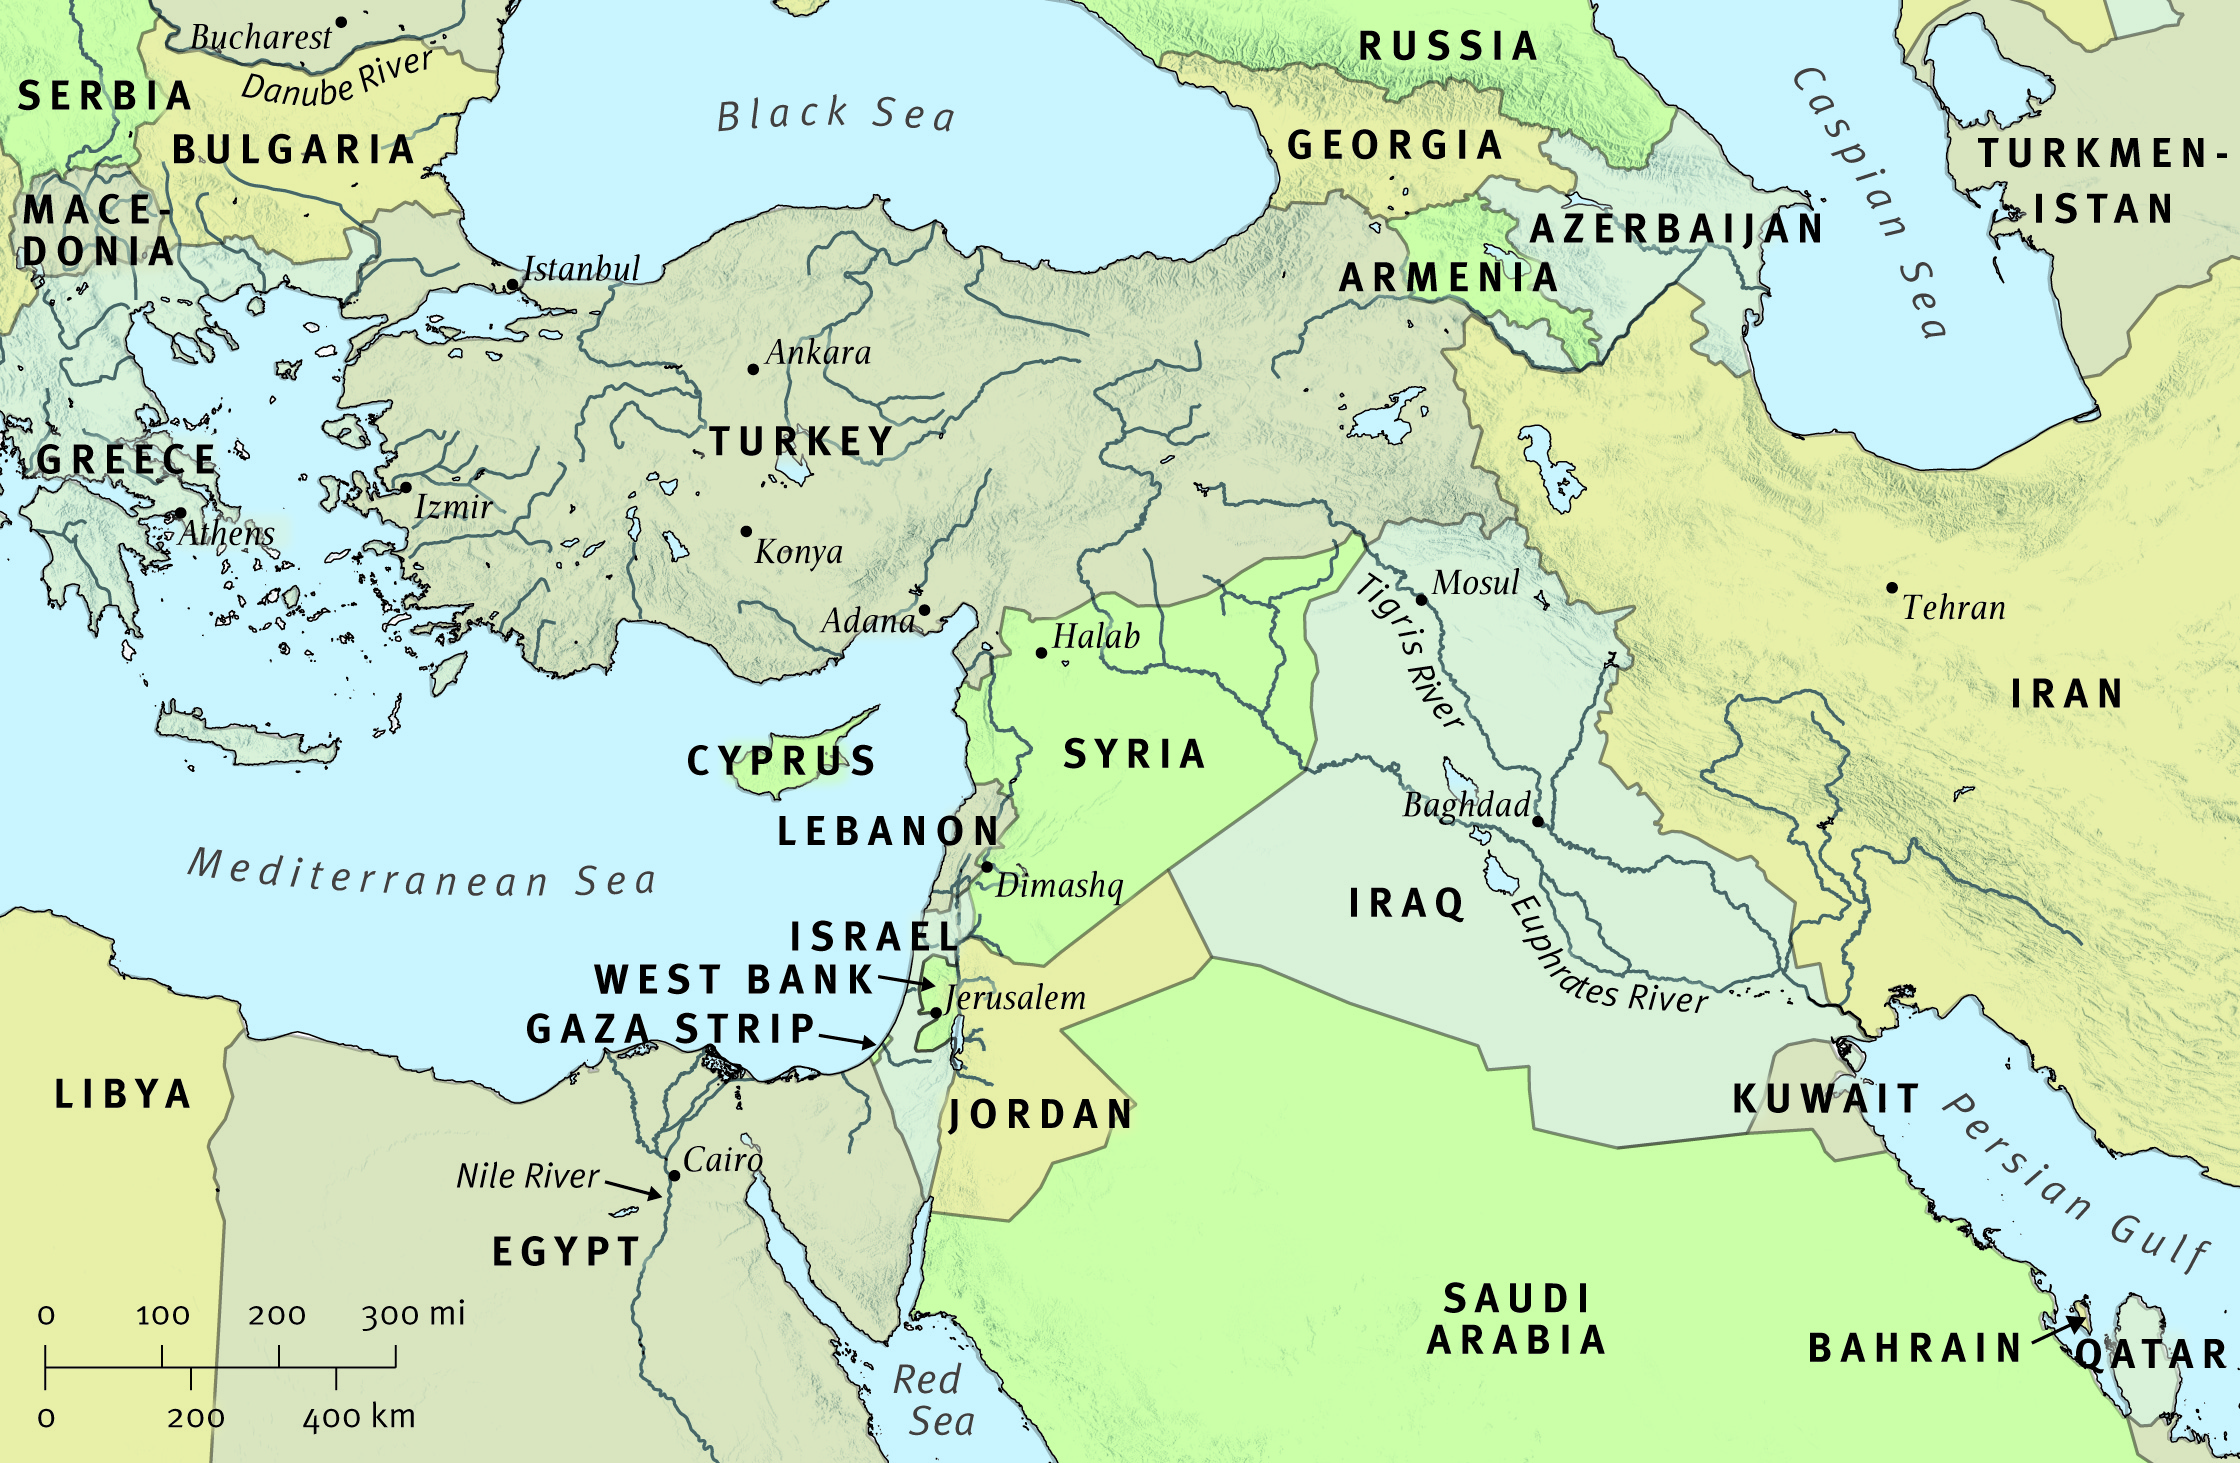 Map 1: The Middle East Today